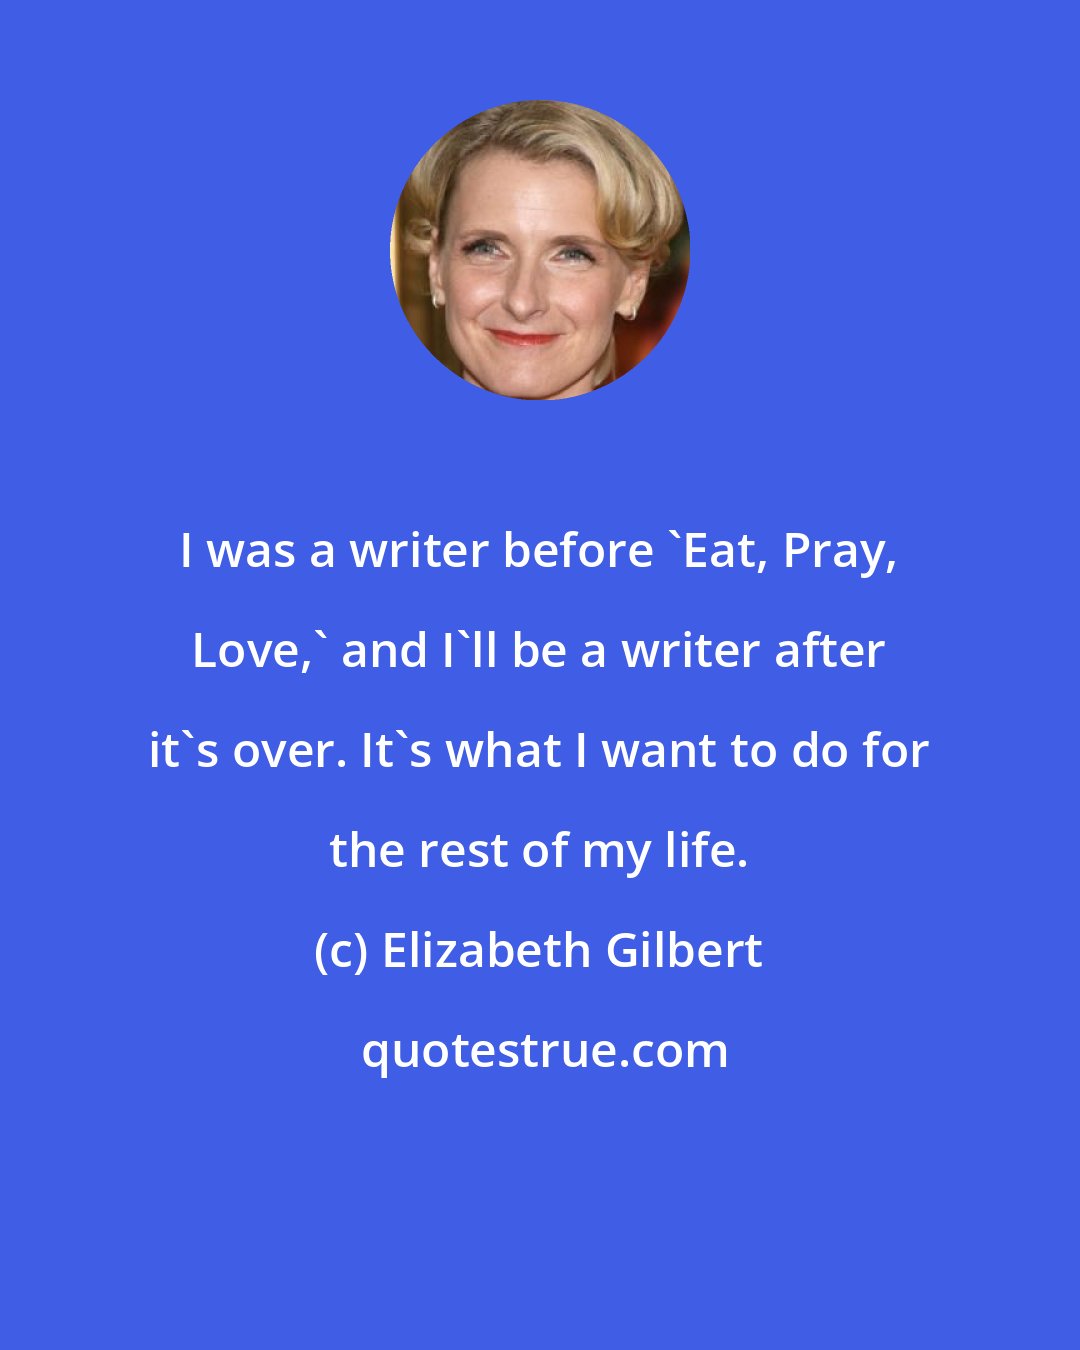 Elizabeth Gilbert: I was a writer before 'Eat, Pray, Love,' and I'll be a writer after it's over. It's what I want to do for the rest of my life.